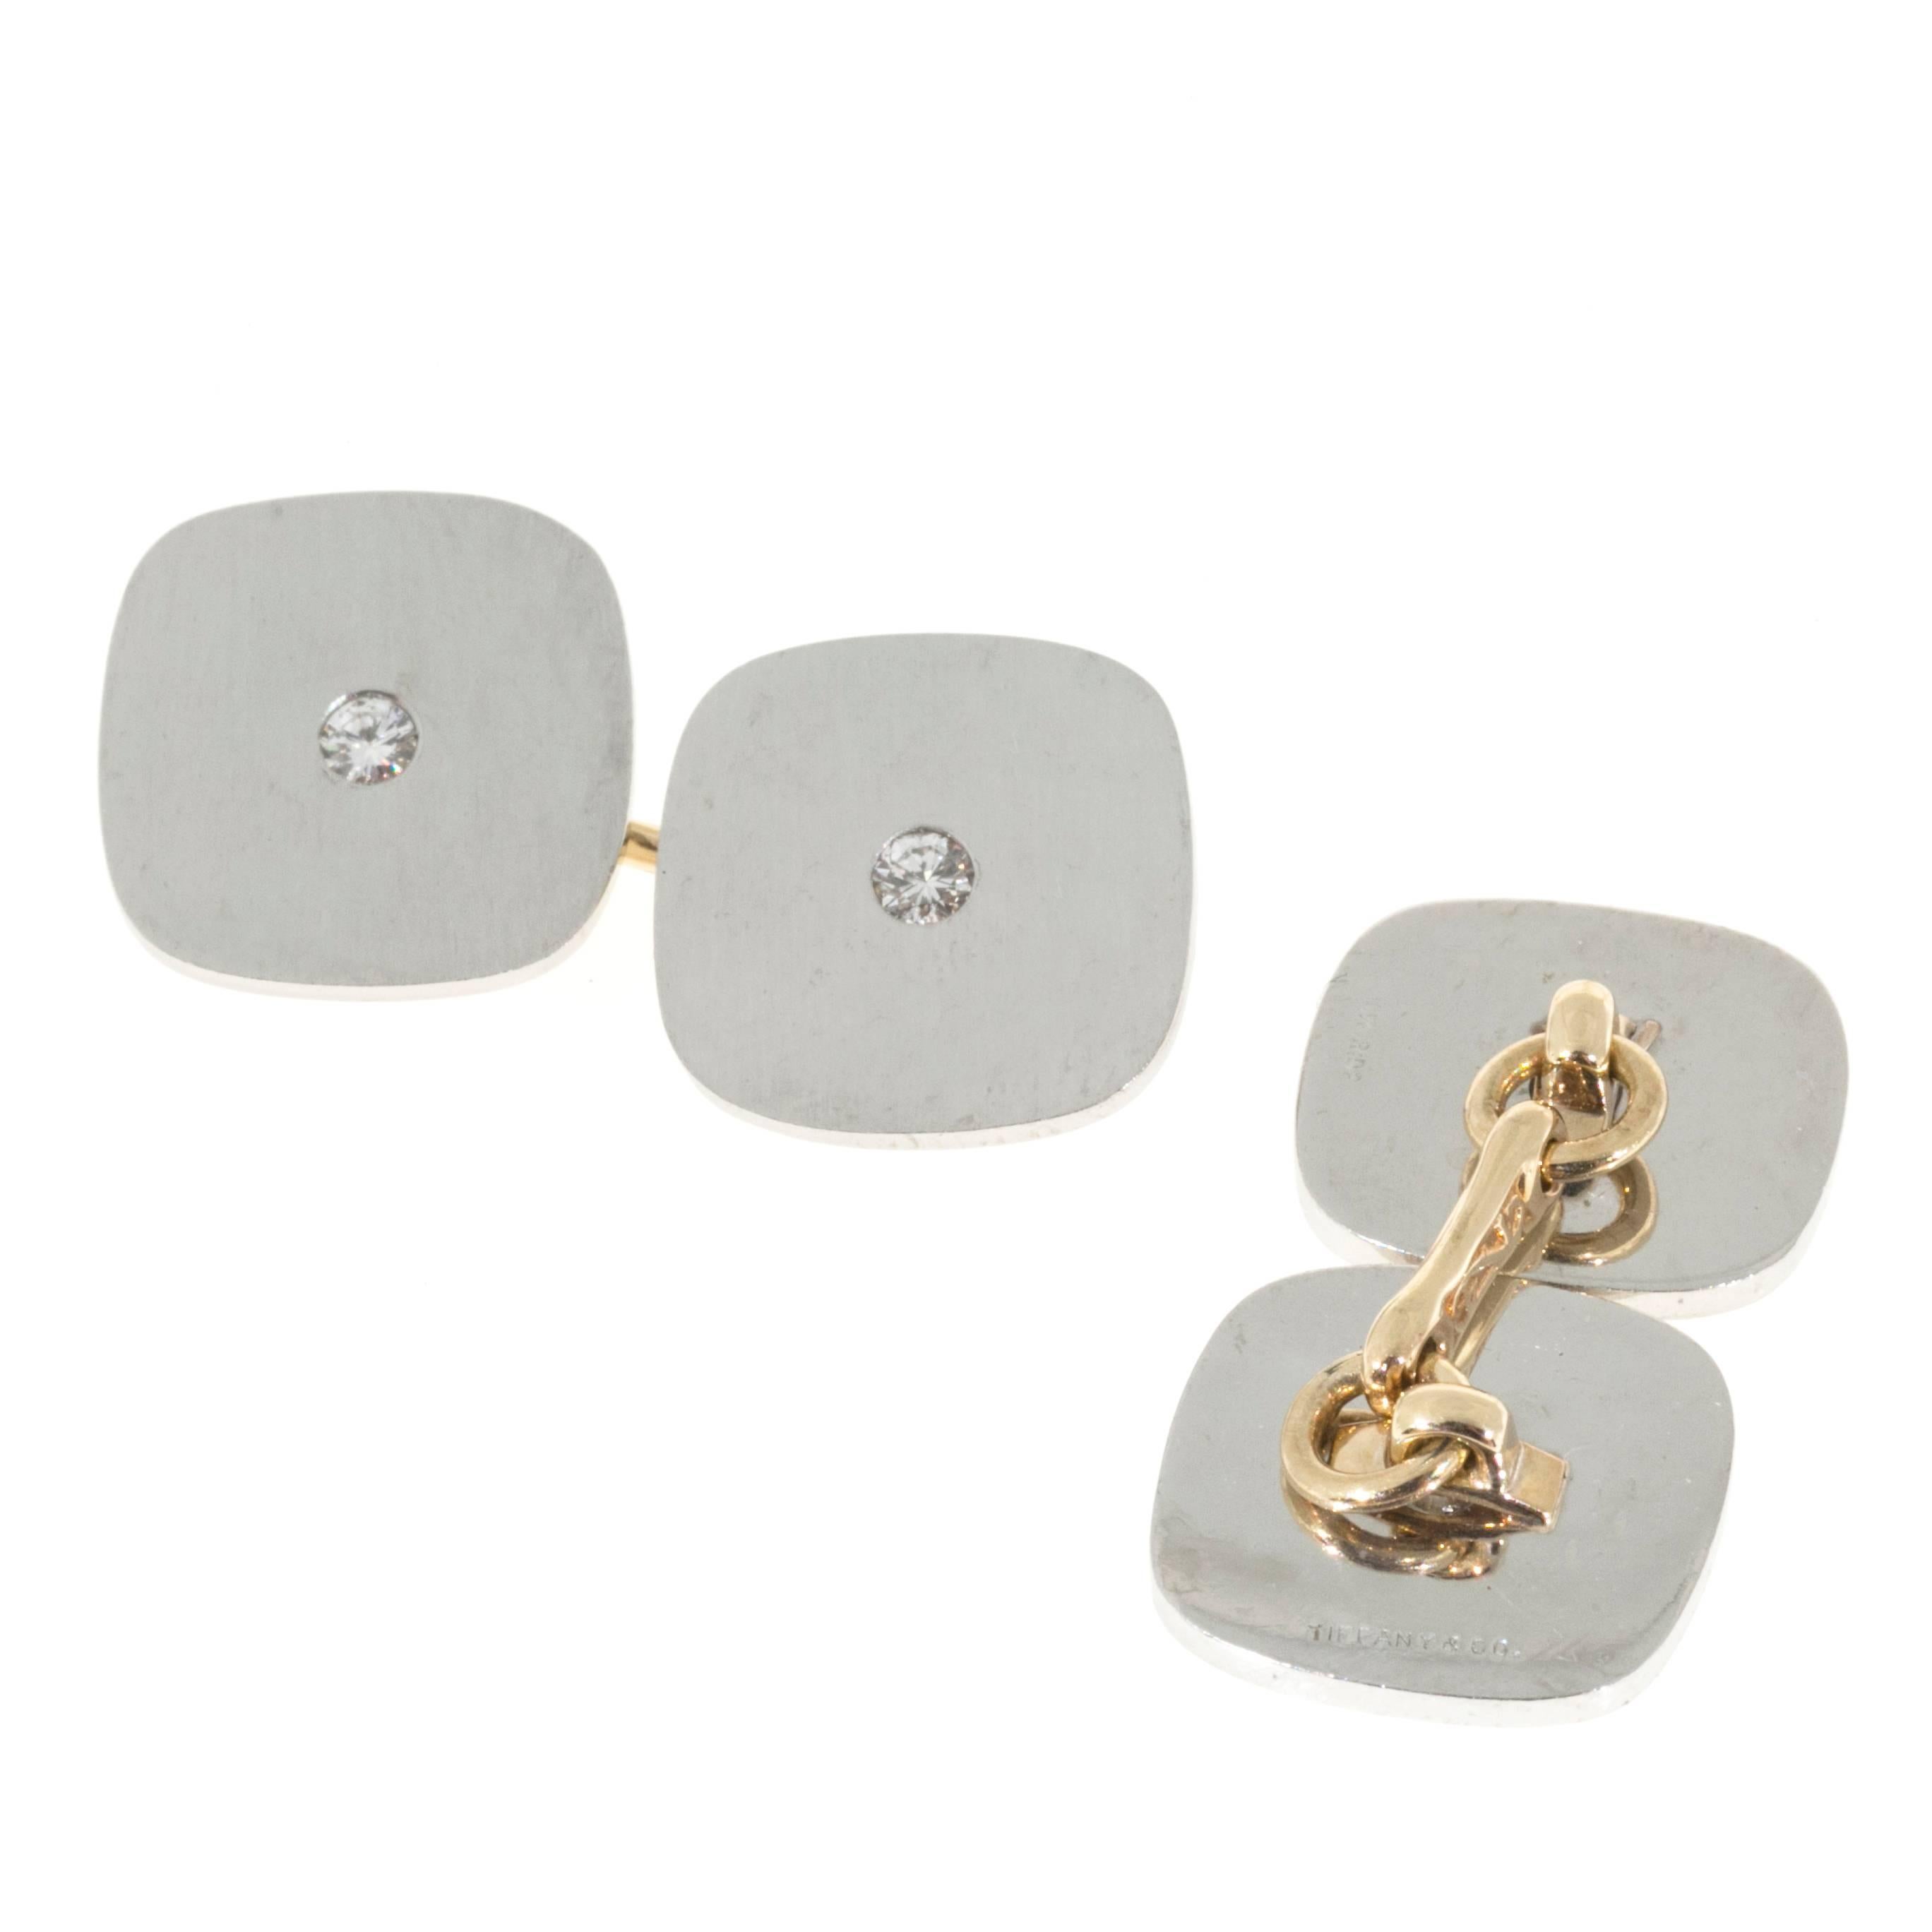 Solid square design Platinum cushion shape double sided Tiffany & Co cufflinks with full cut diamond centers. The cushion shaped Platinum tops measure 13.7 x 1.2mm thick. The cushion shaped tops are connected by a 14k yellow gold bar and jump ring.